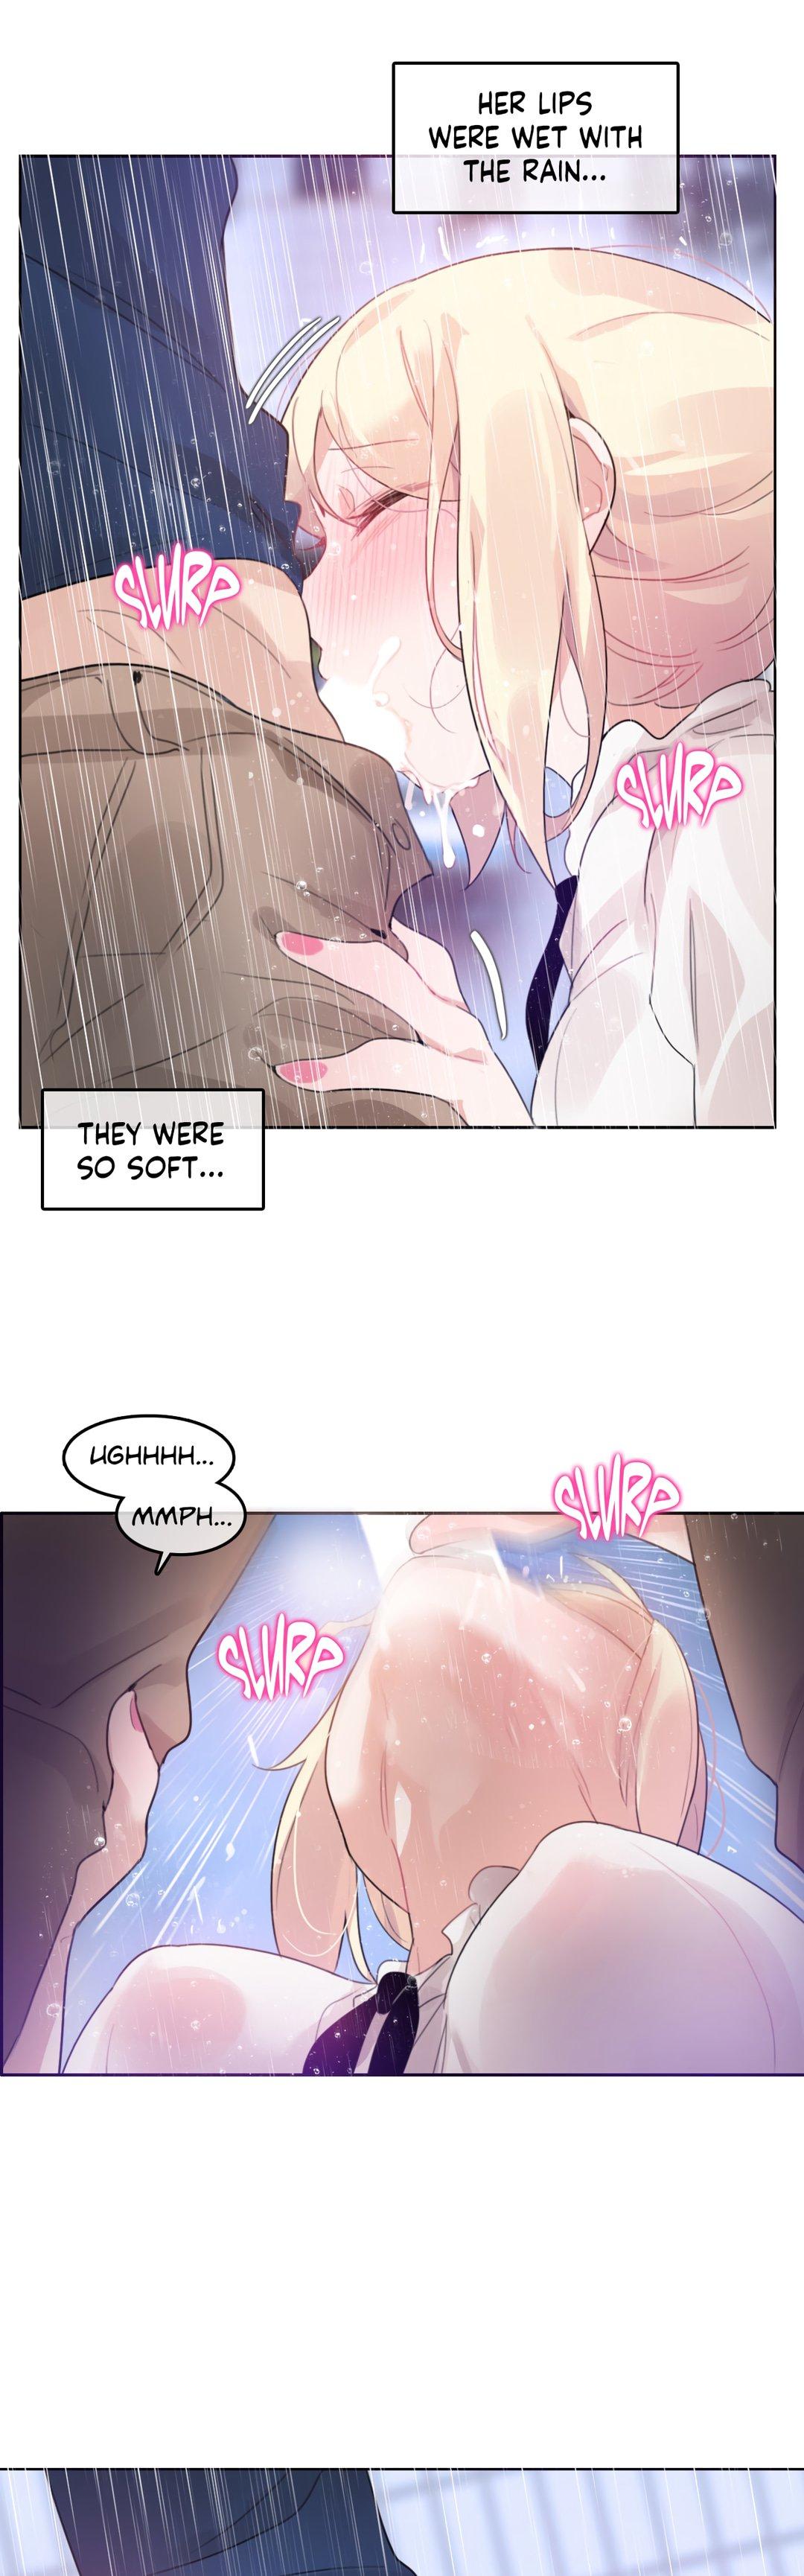 A Pervert's Daily Life • Chapter 36-40 18